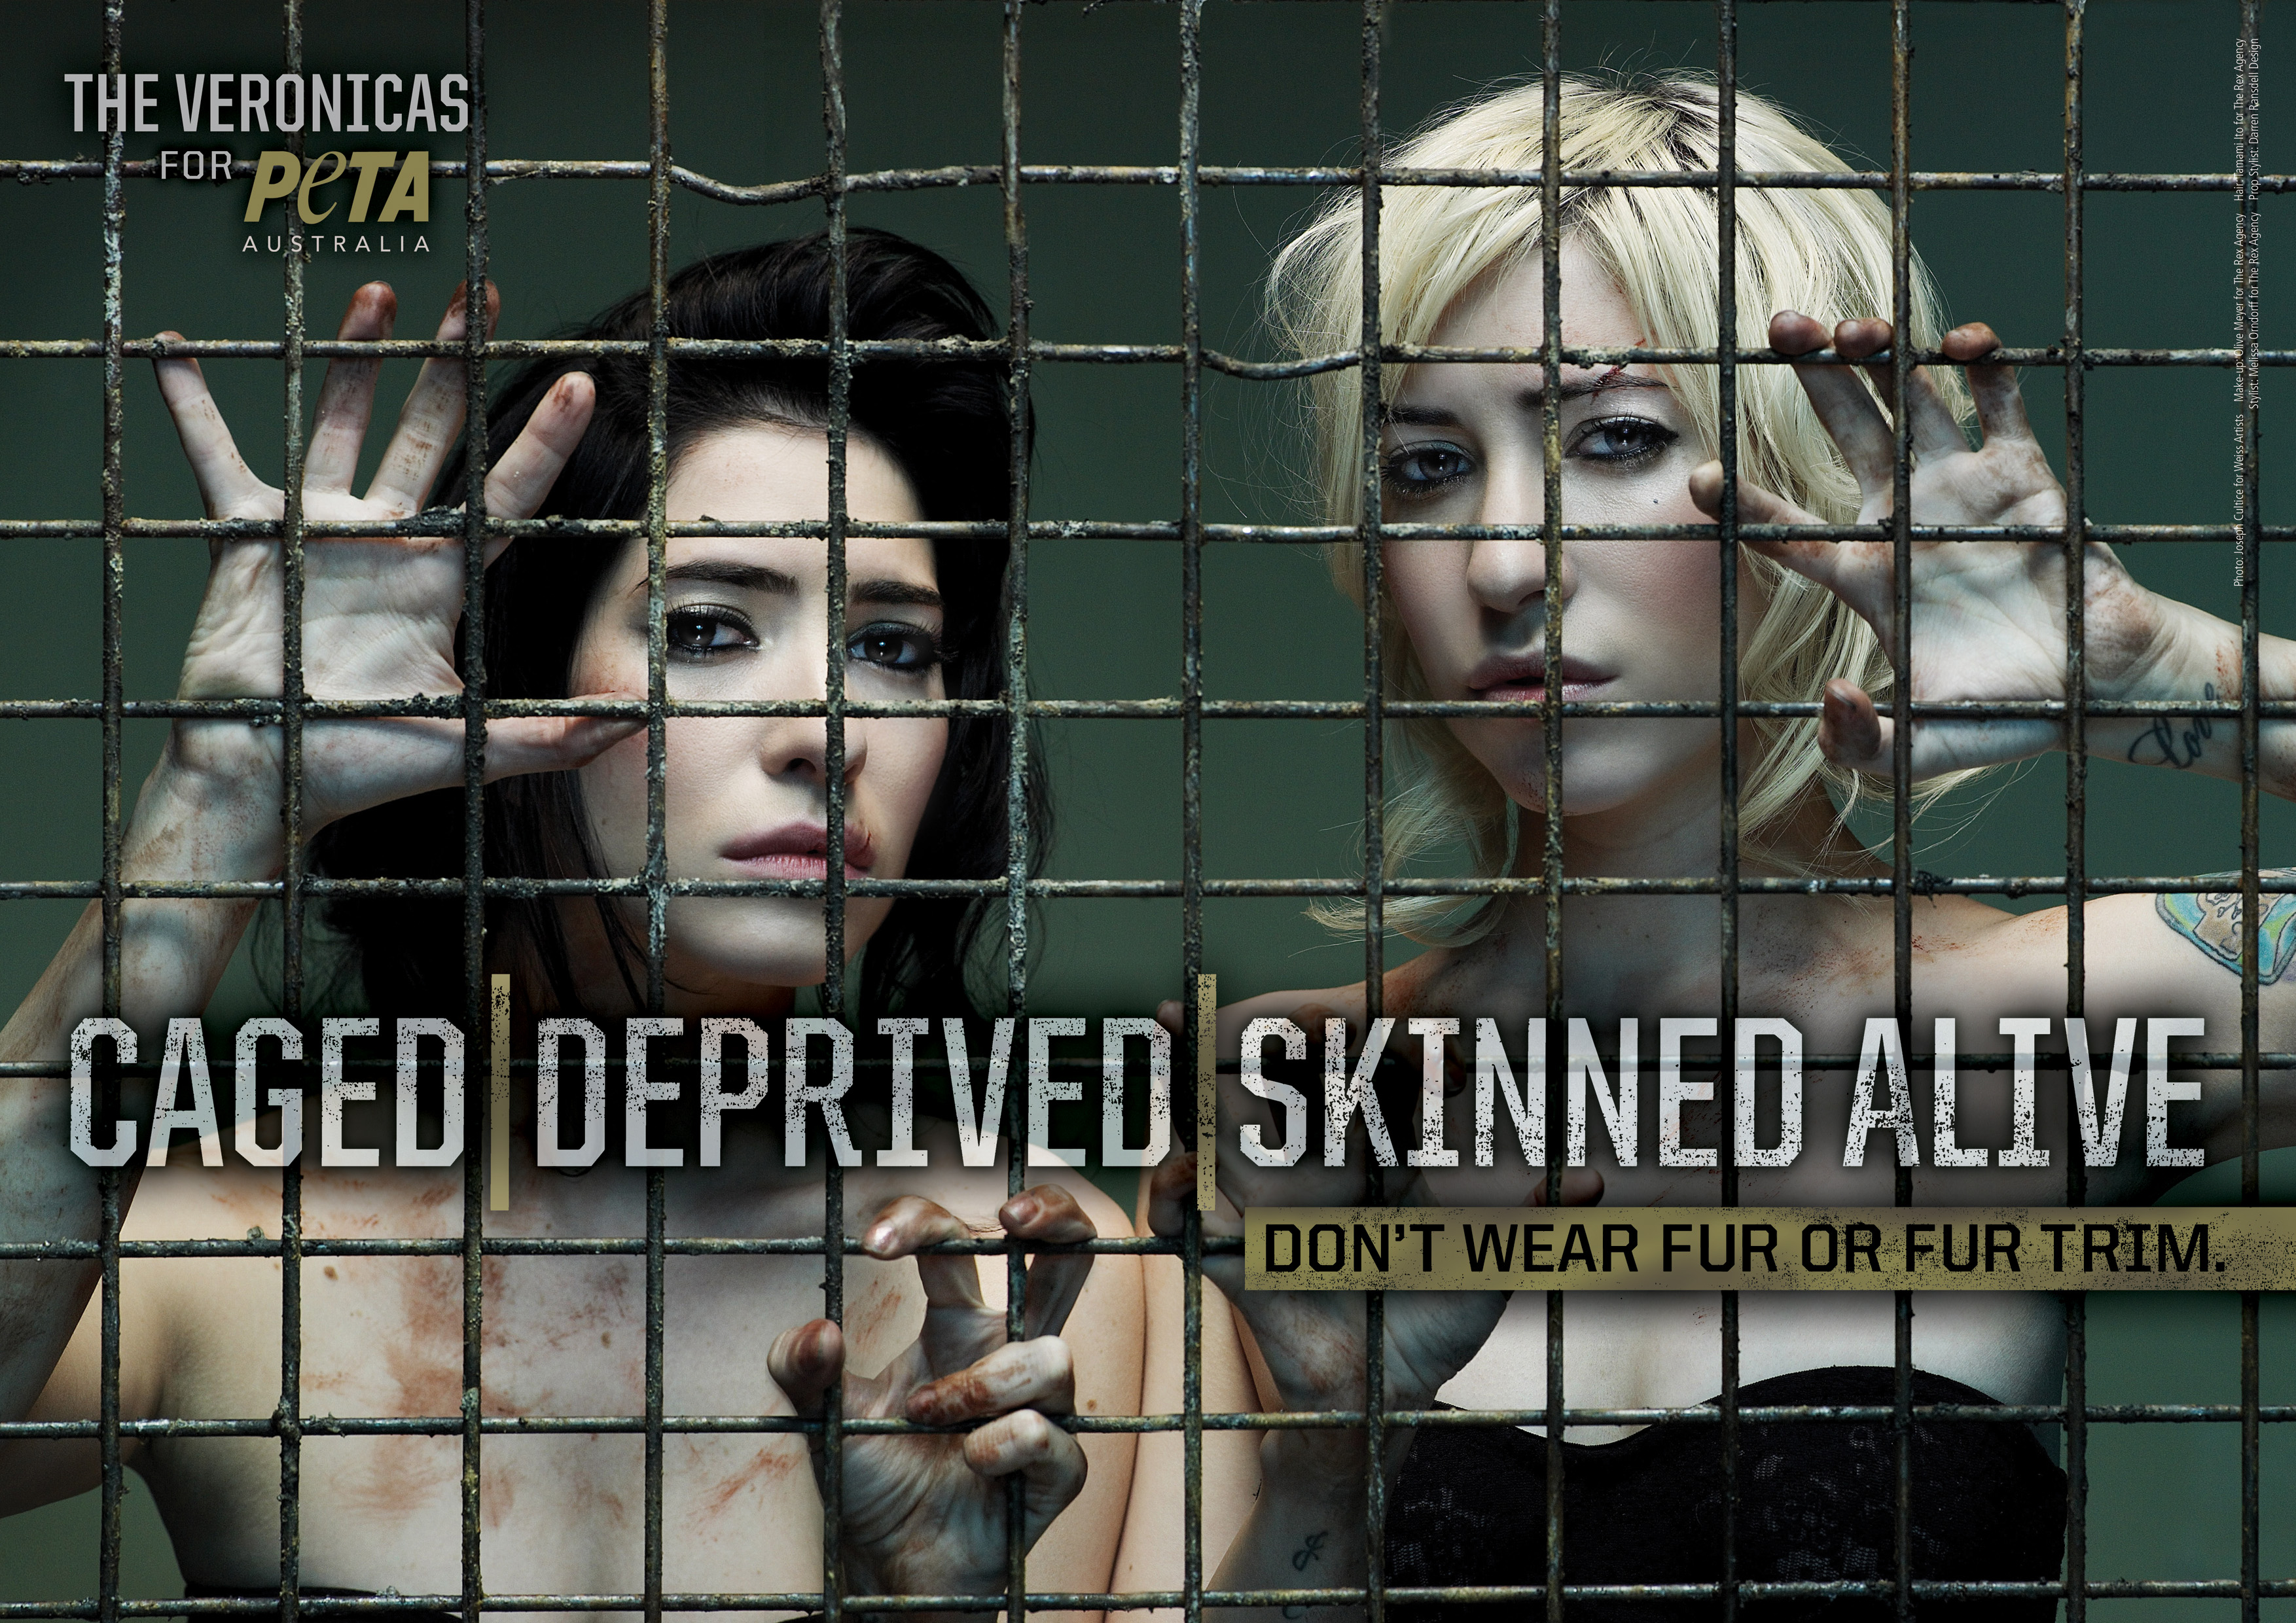 Caged, Deprived, Skinned Alive – The Veronicas Speak Out Against Fur